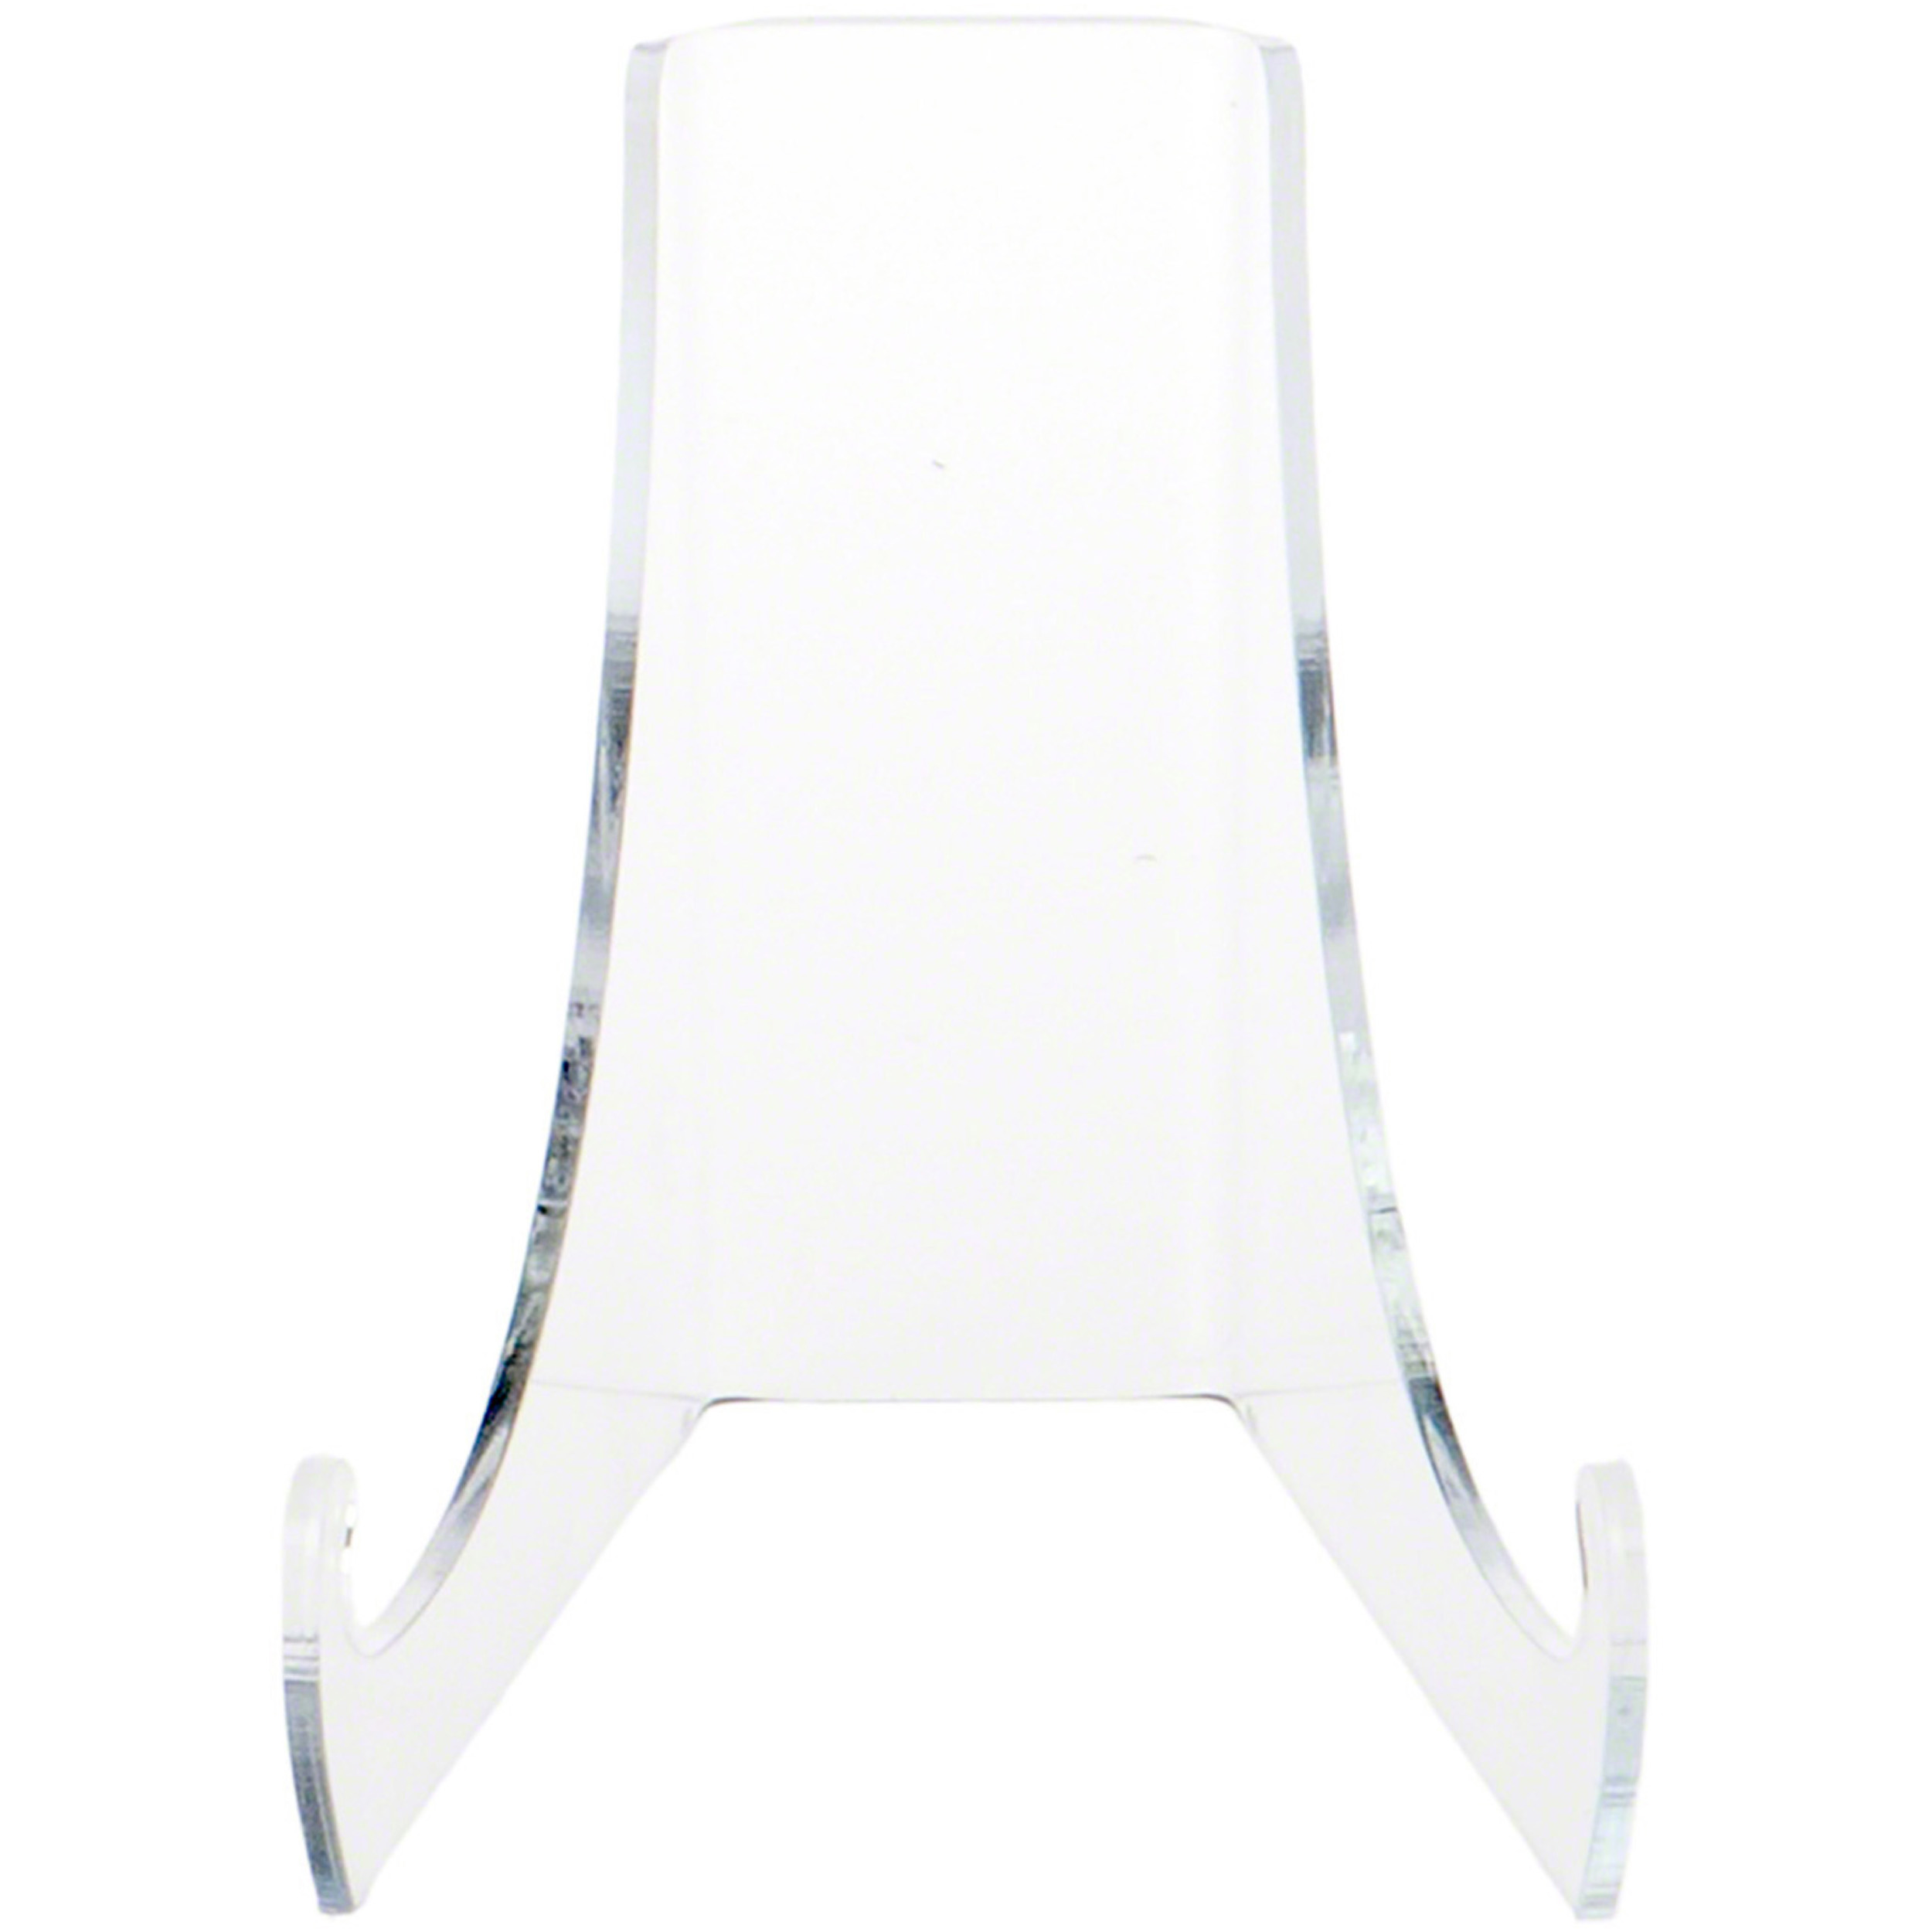 Plymor Clear Acrylic Flat Back Easel With Extra Deep Support Ledges, 4.5" H x 4" W x 5.75" D (12 Pack) - image 1 of 2